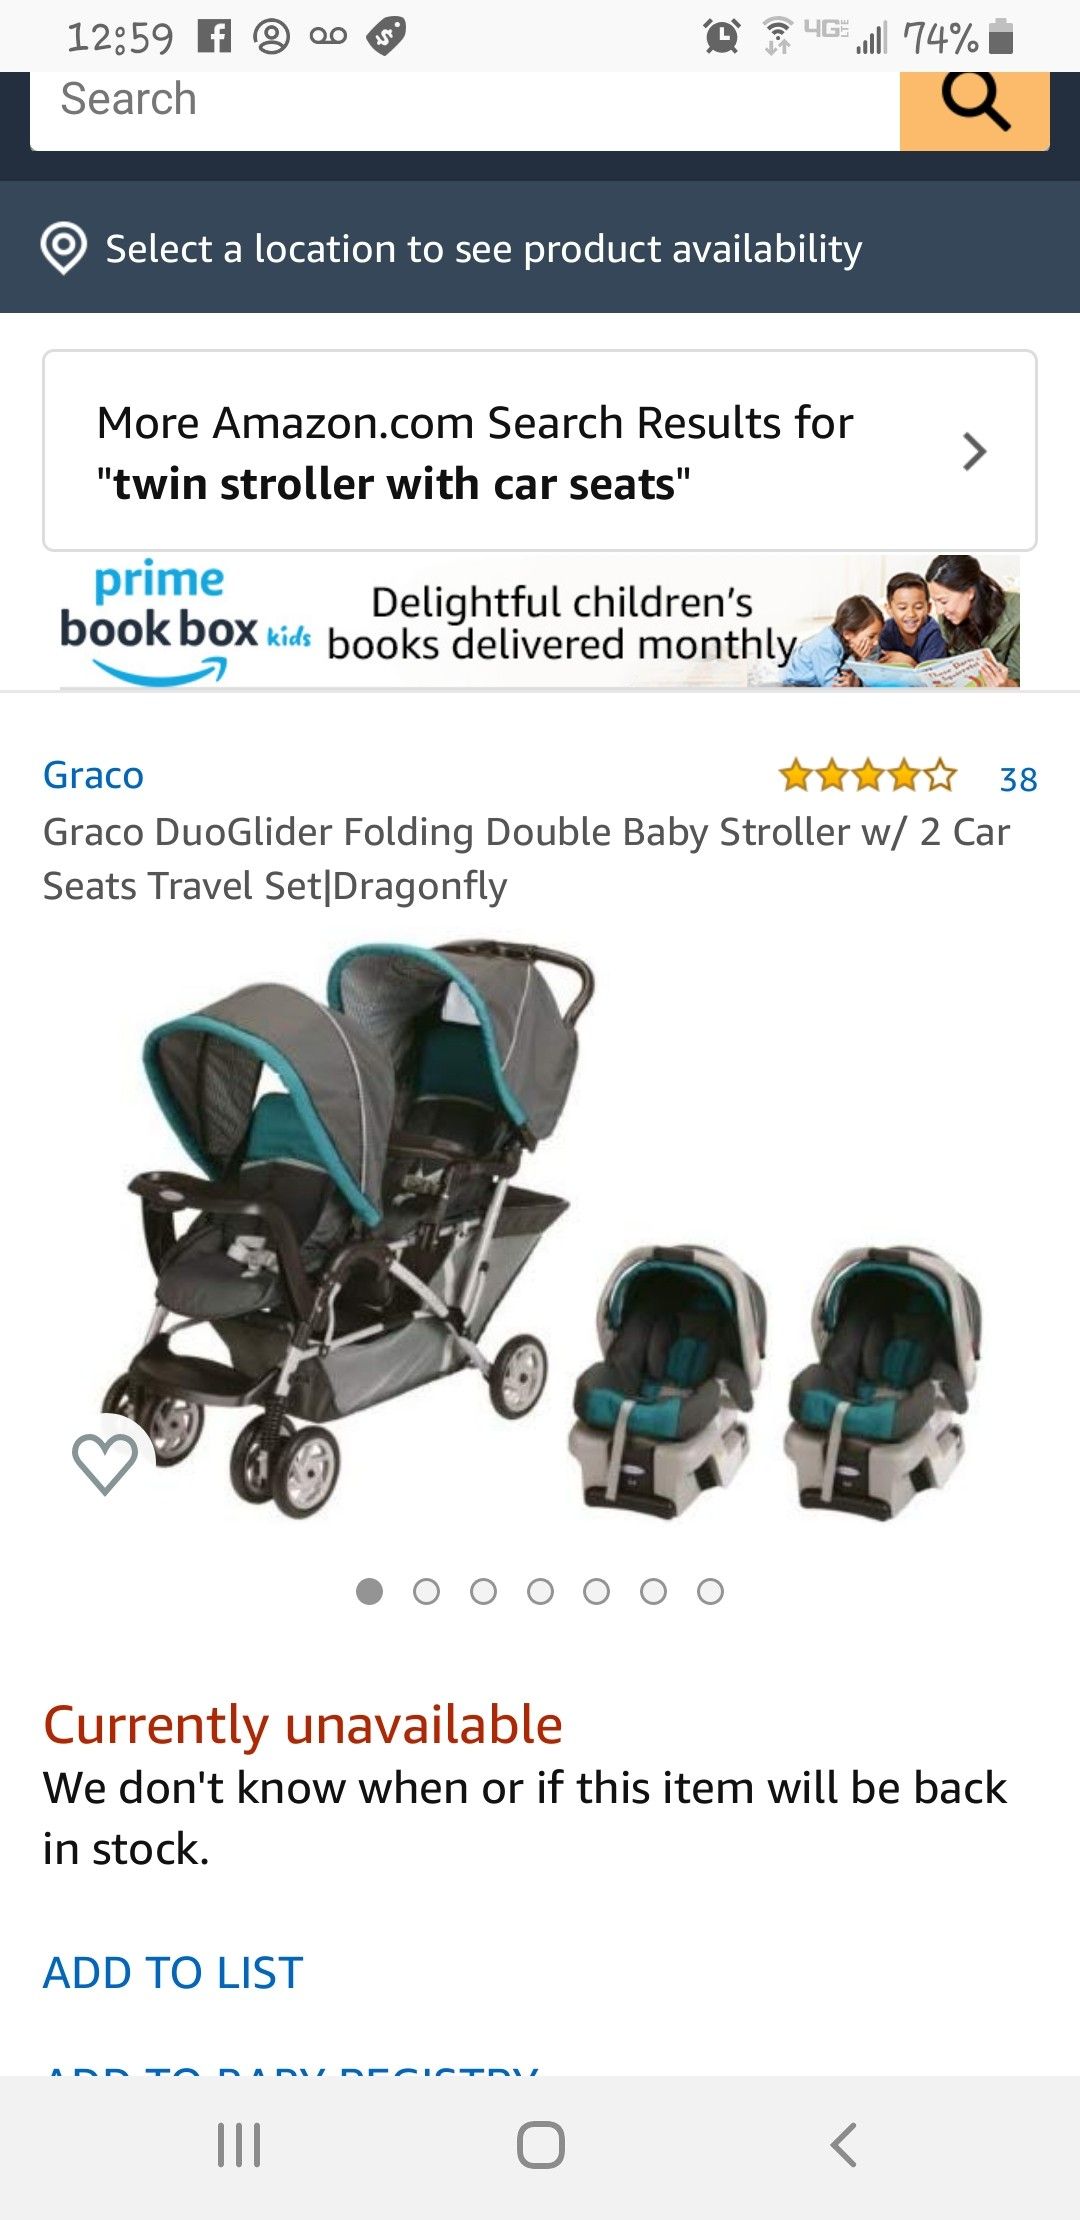 Graco Duo glider stroller and car seats with bases